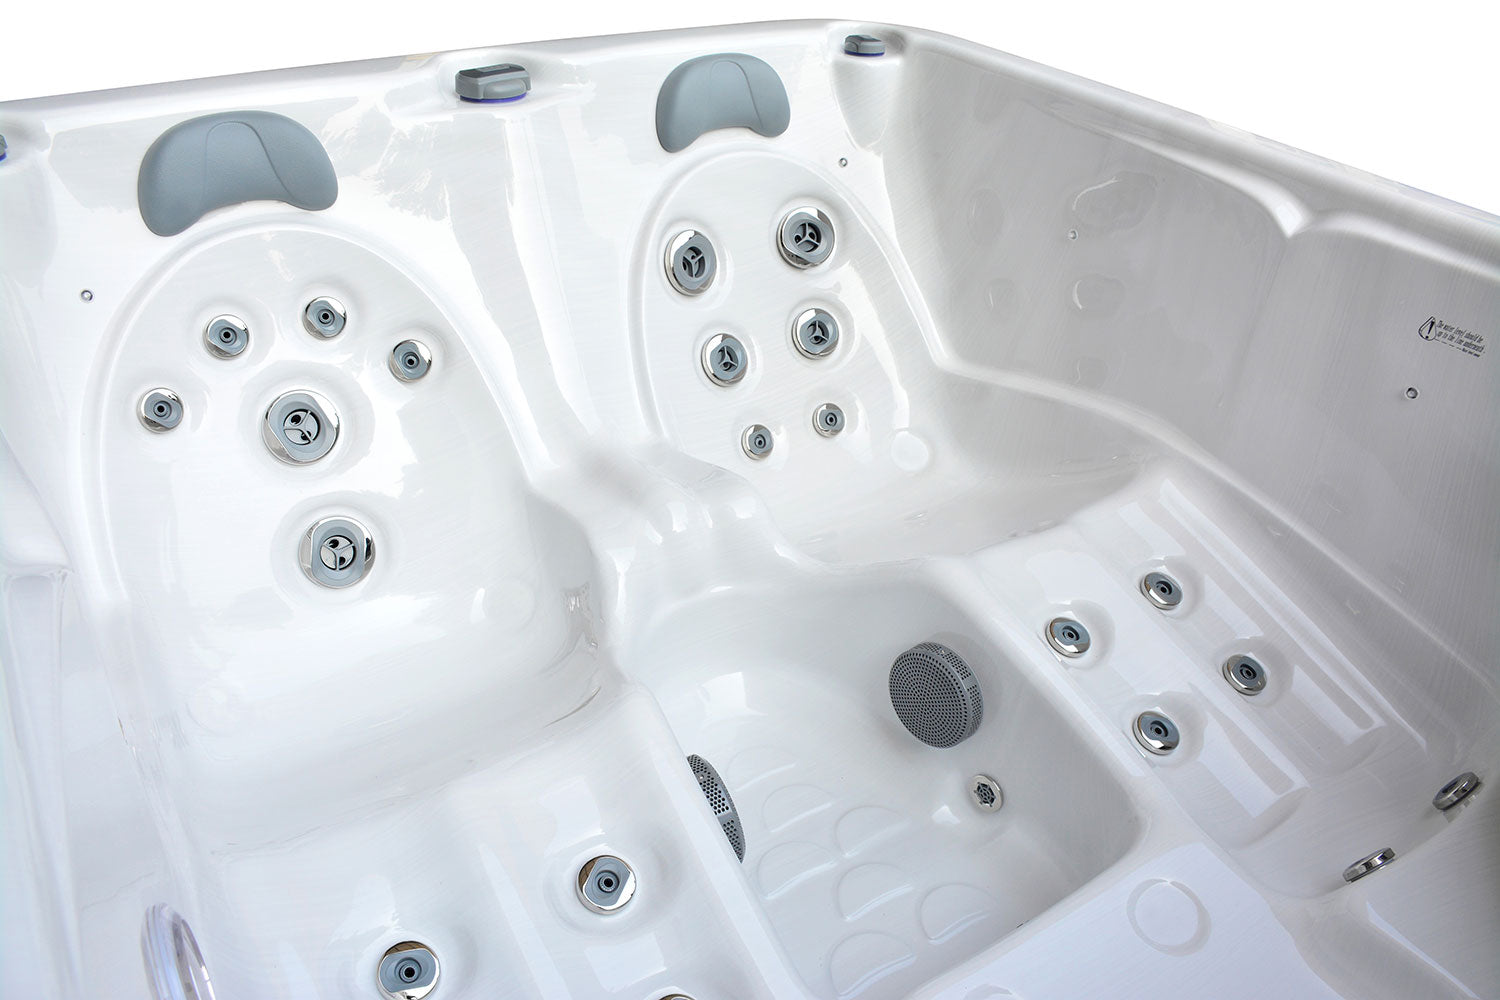 OASIS RX-170 WELLNESS HOT TUB AVAILABLE AT HOT TUB LIVERPOOL 